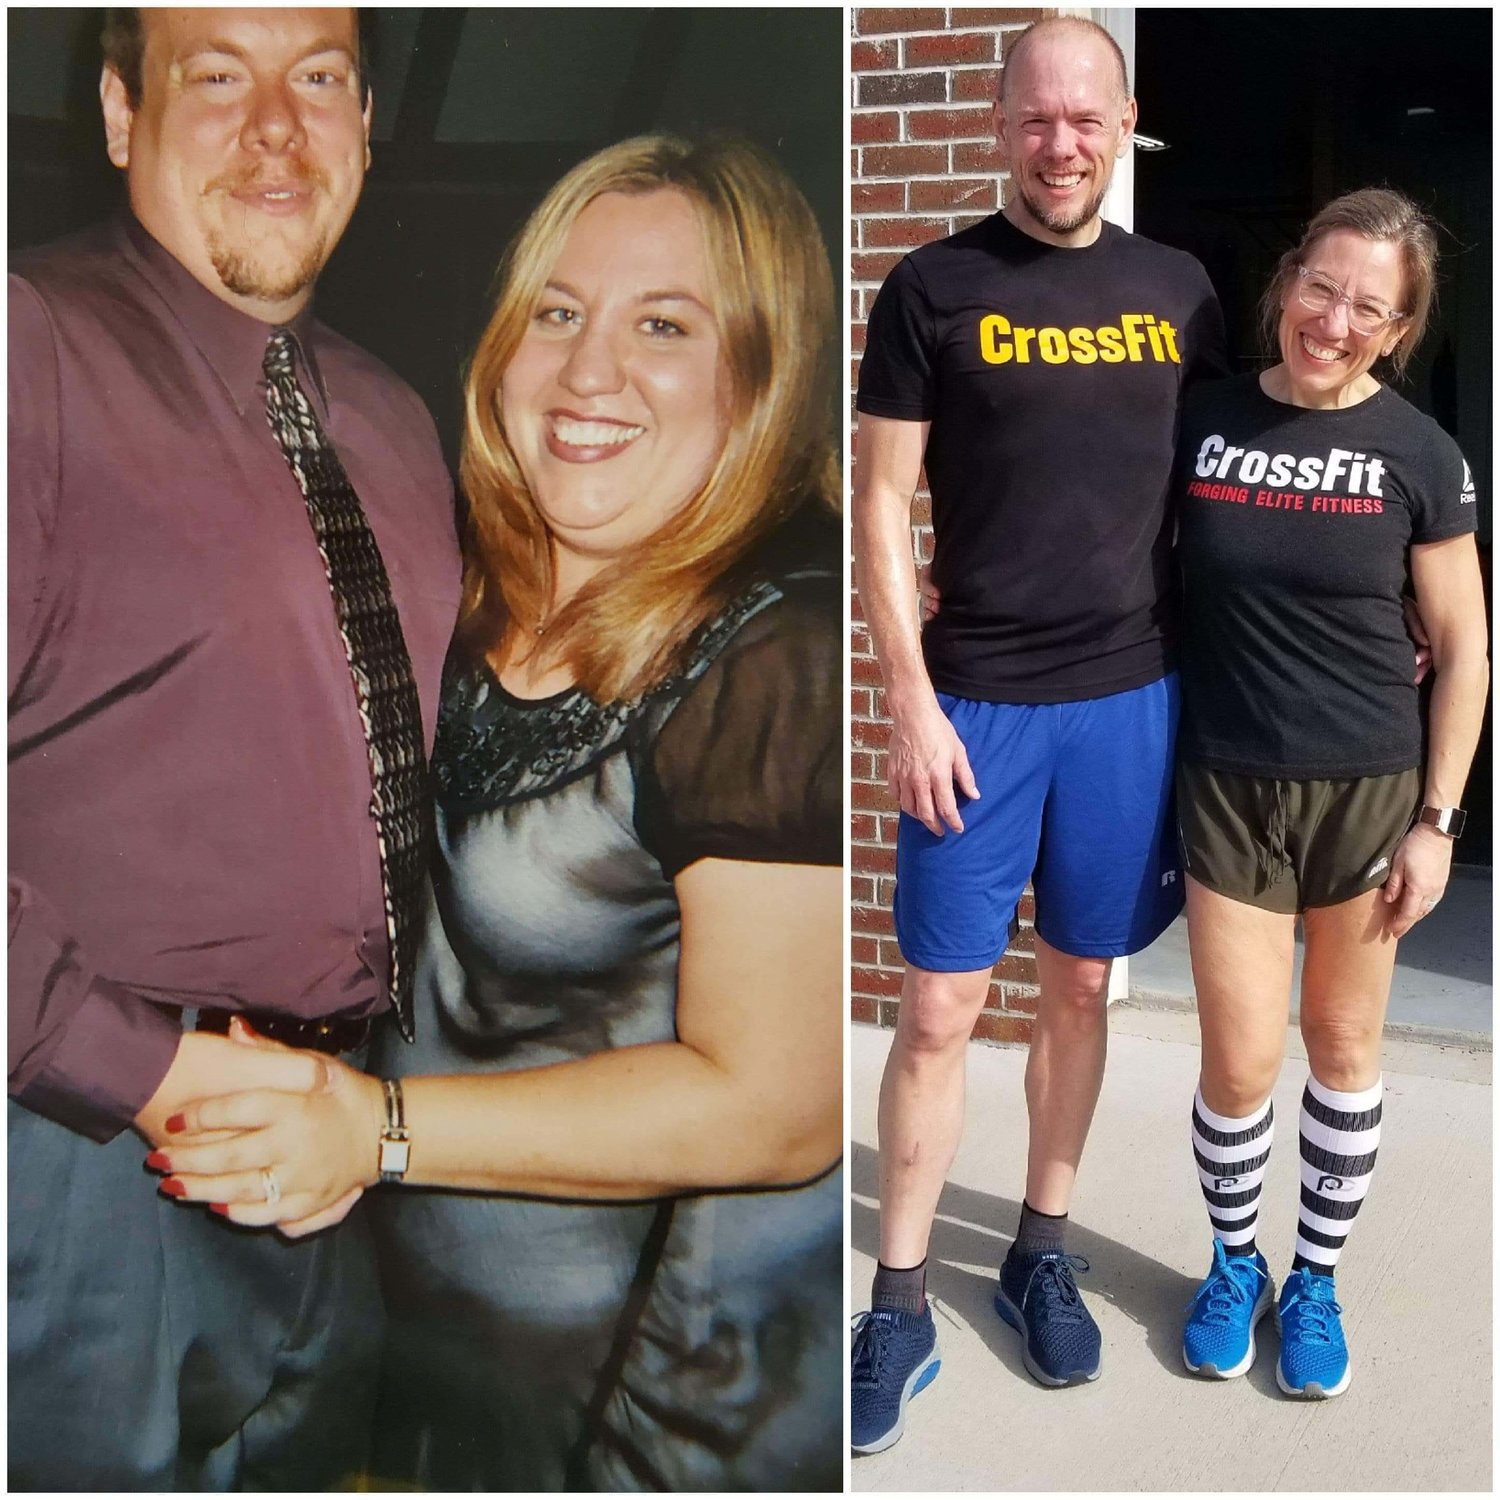 LEFT: Mike and Jen Pendleton before their weight loss journey began. Mike was over 300 pounds and Jen at 265. RIGHT: Jen and Mike Pendleton at Elavus CrossFit.